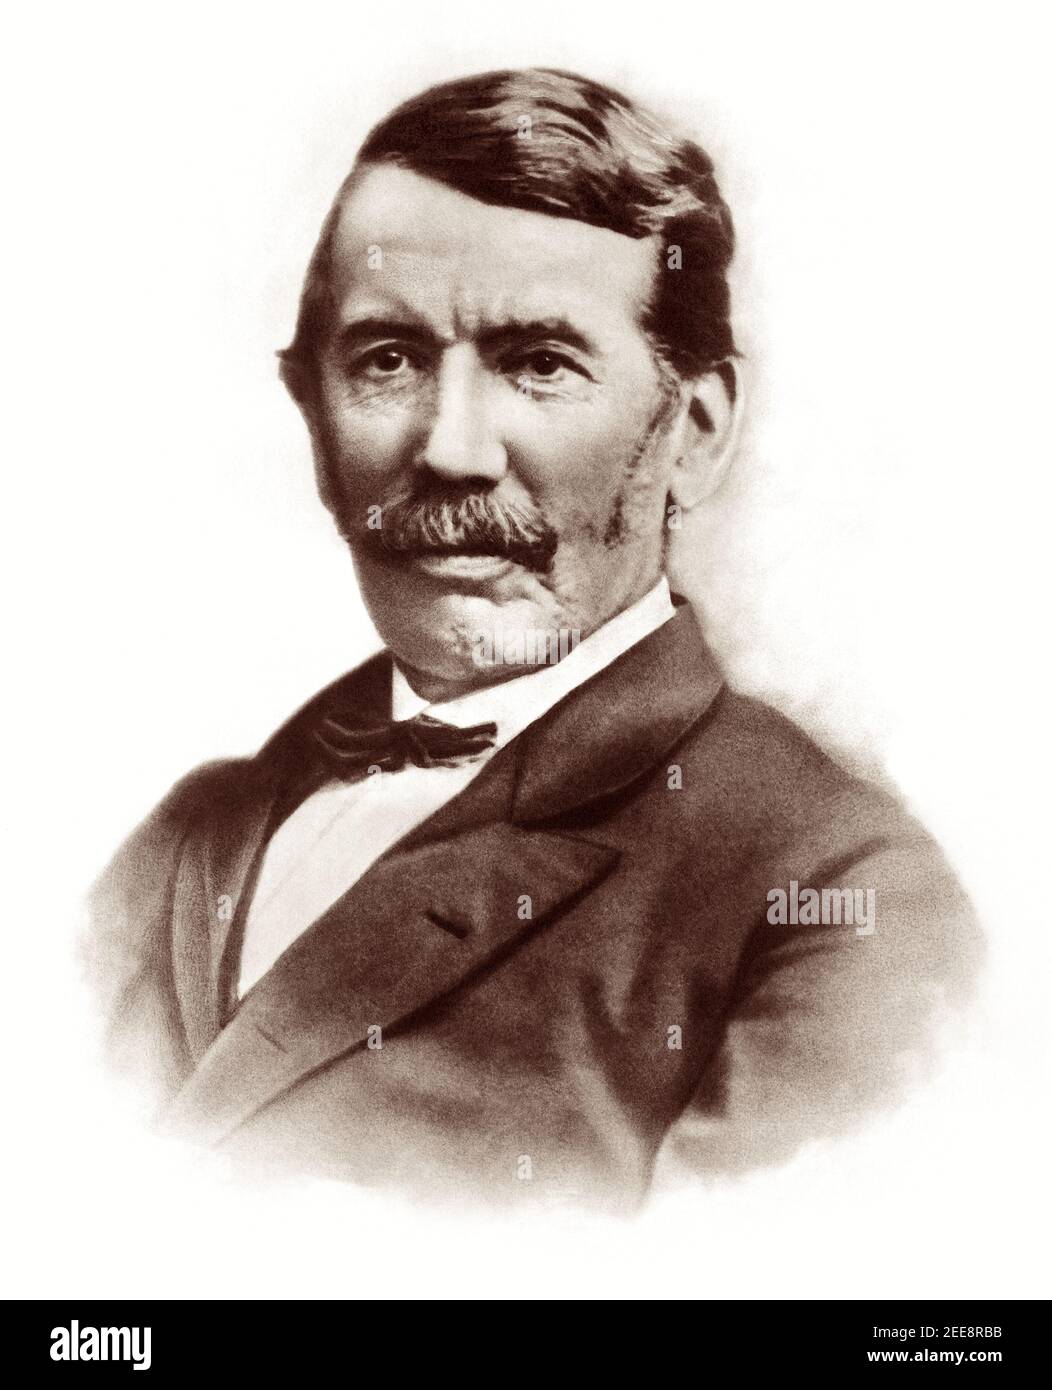 David Livingstone (1813–1873), Scottish physician, Congregationalist, pioneer Christian missionary with the London Missionary Society, explorer in Africa, and one of the most popular British heroes of the late 19th-century Victorian era. Photo c1870. Stock Photo